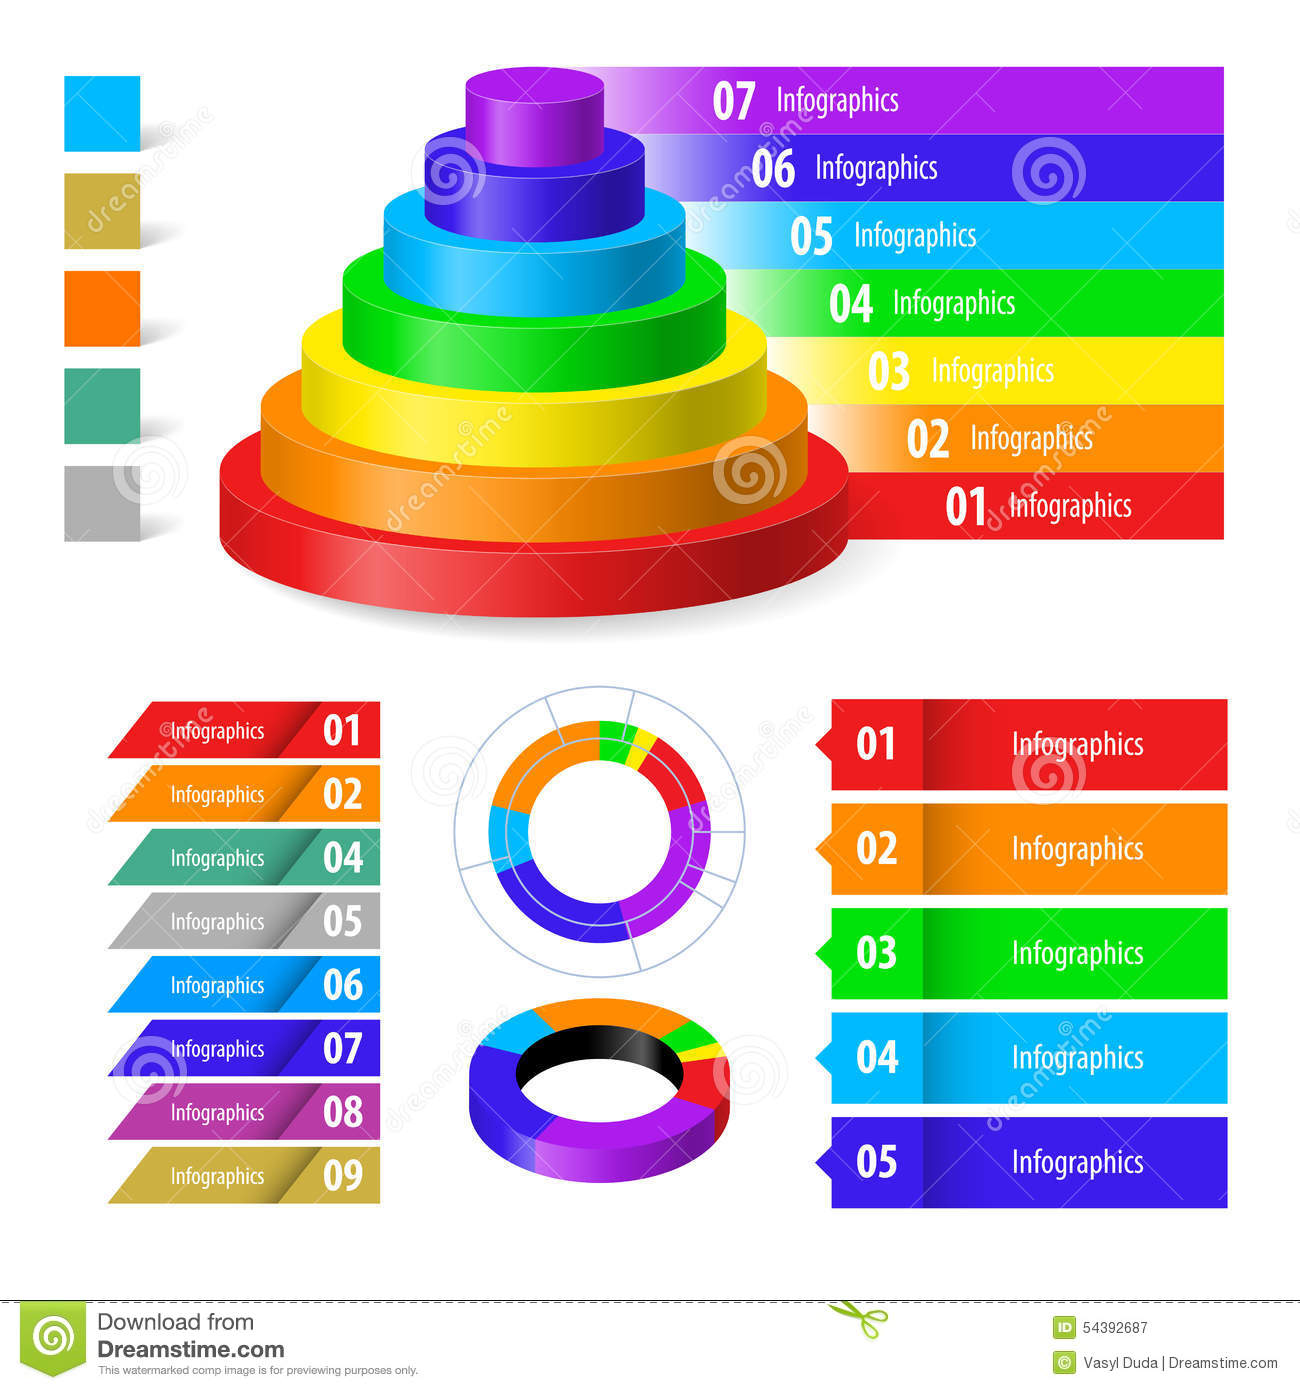 Infographic: The Psychology of Color